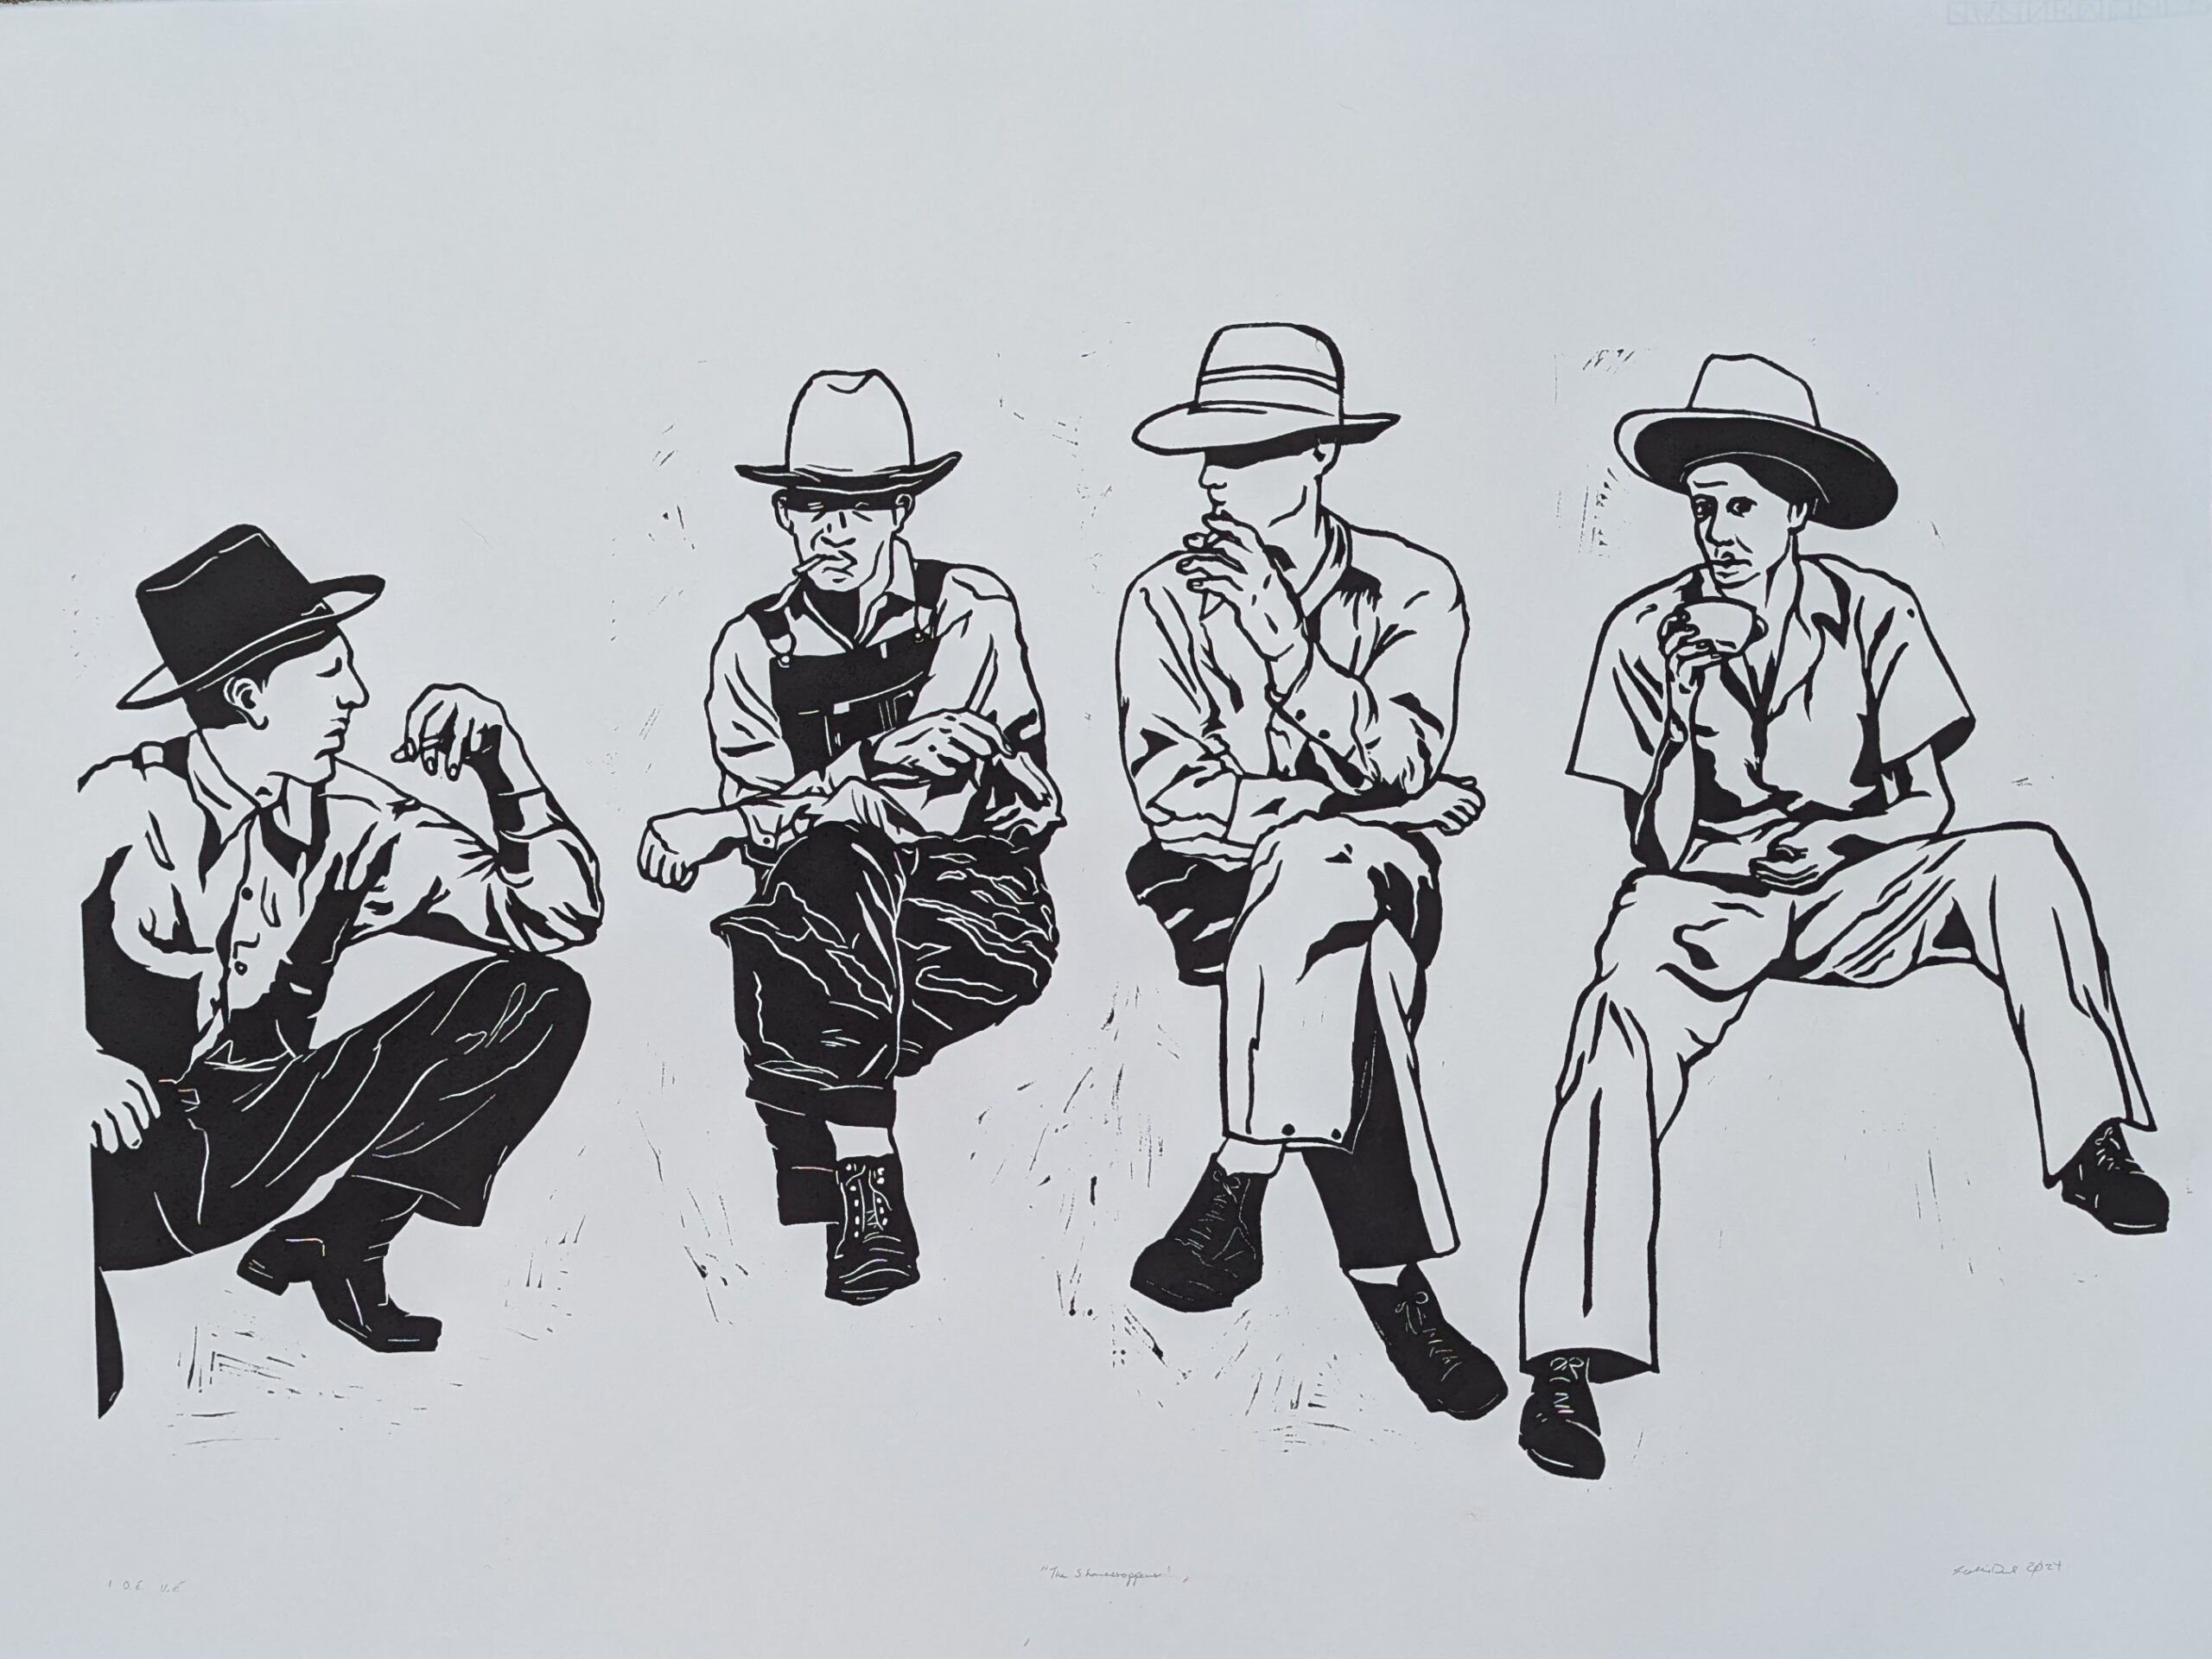 "Sharecroppers" by Artist Leslie Deil shows four ranch hands relaxing after lunch with the background stripped away